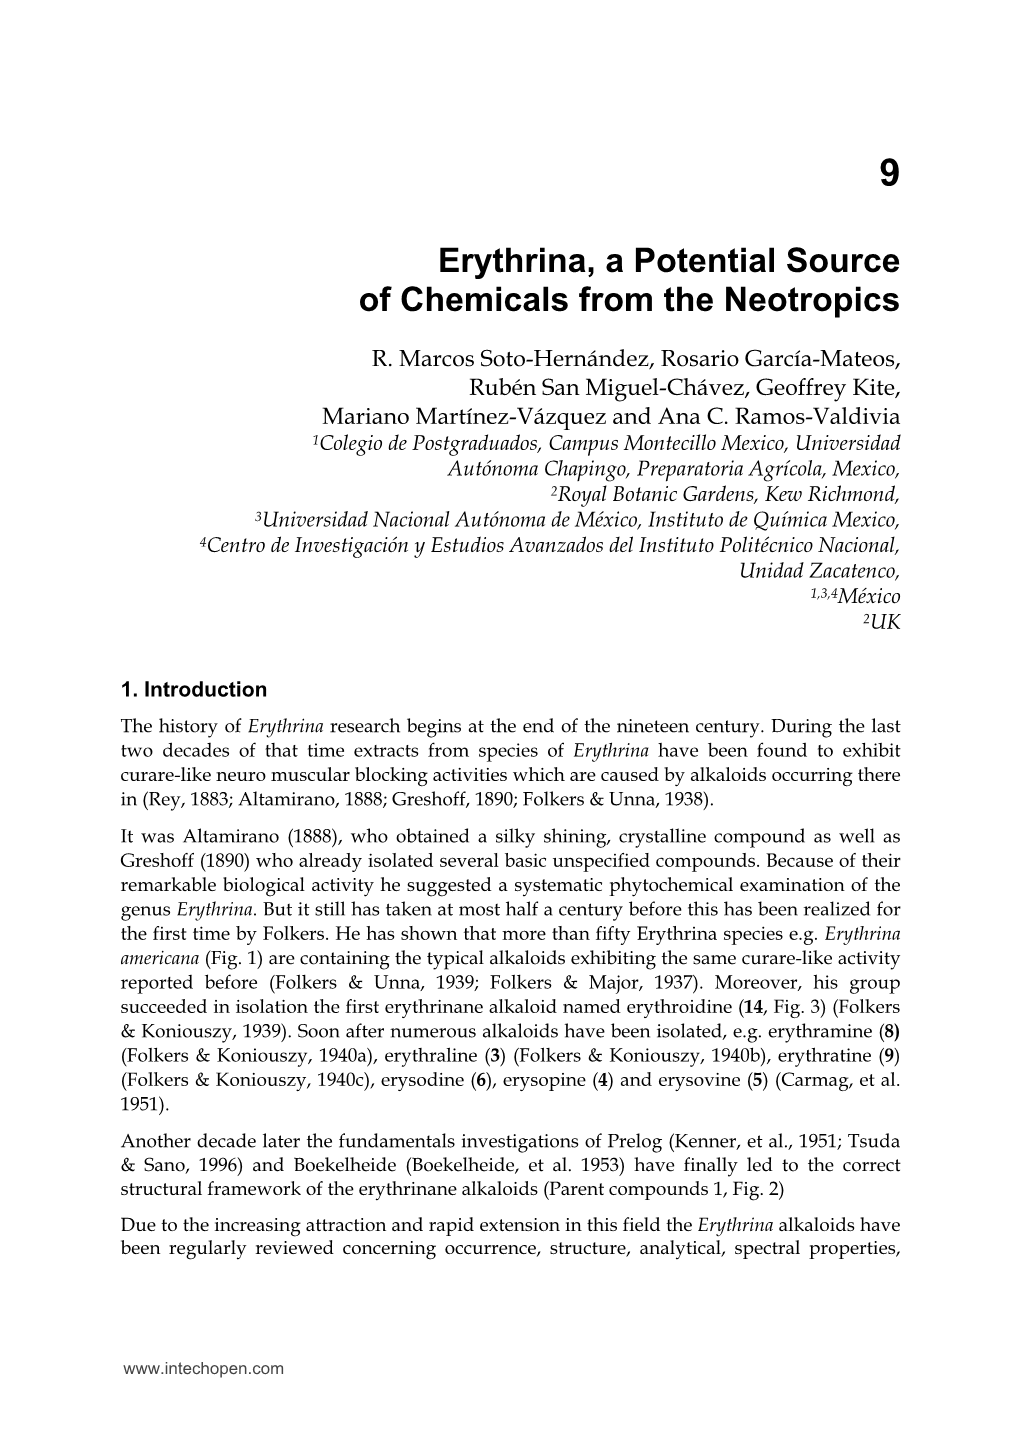 Erythrina, a Potential Source of Chemicals from the Neotropics